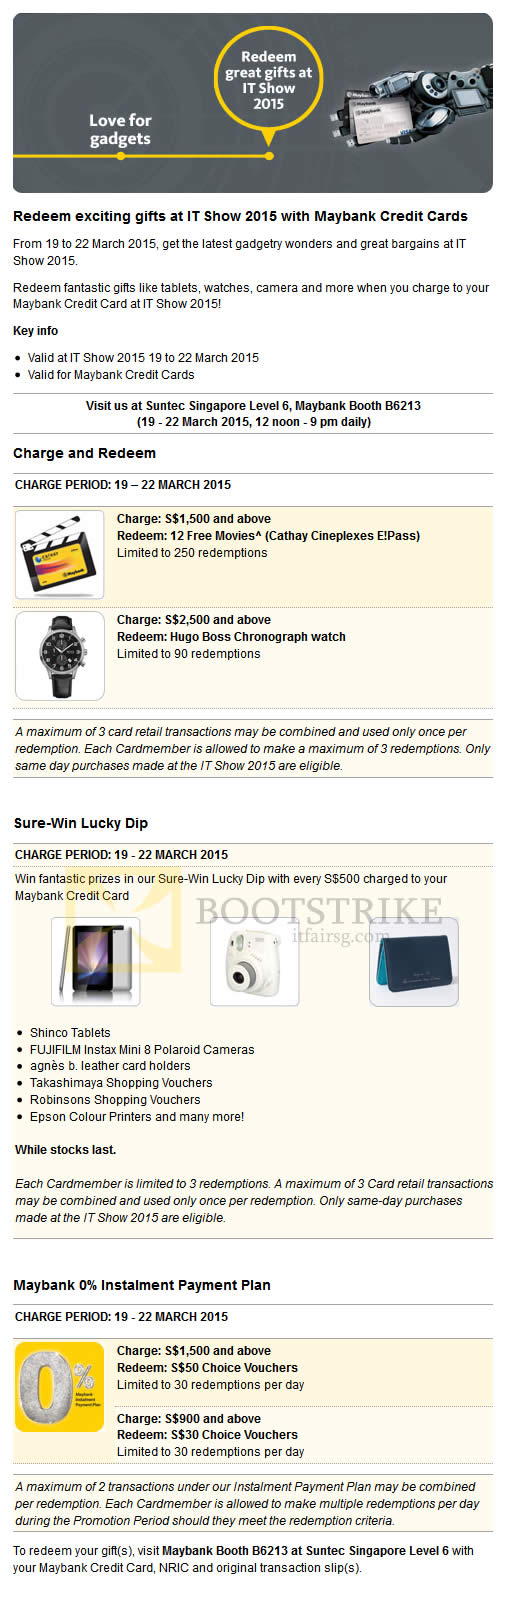 IT SHOW 2015 price list image brochure of Maybank Charge N Redeem, Sure-Win Lucky Dip, Instalment Payment Plan Gift